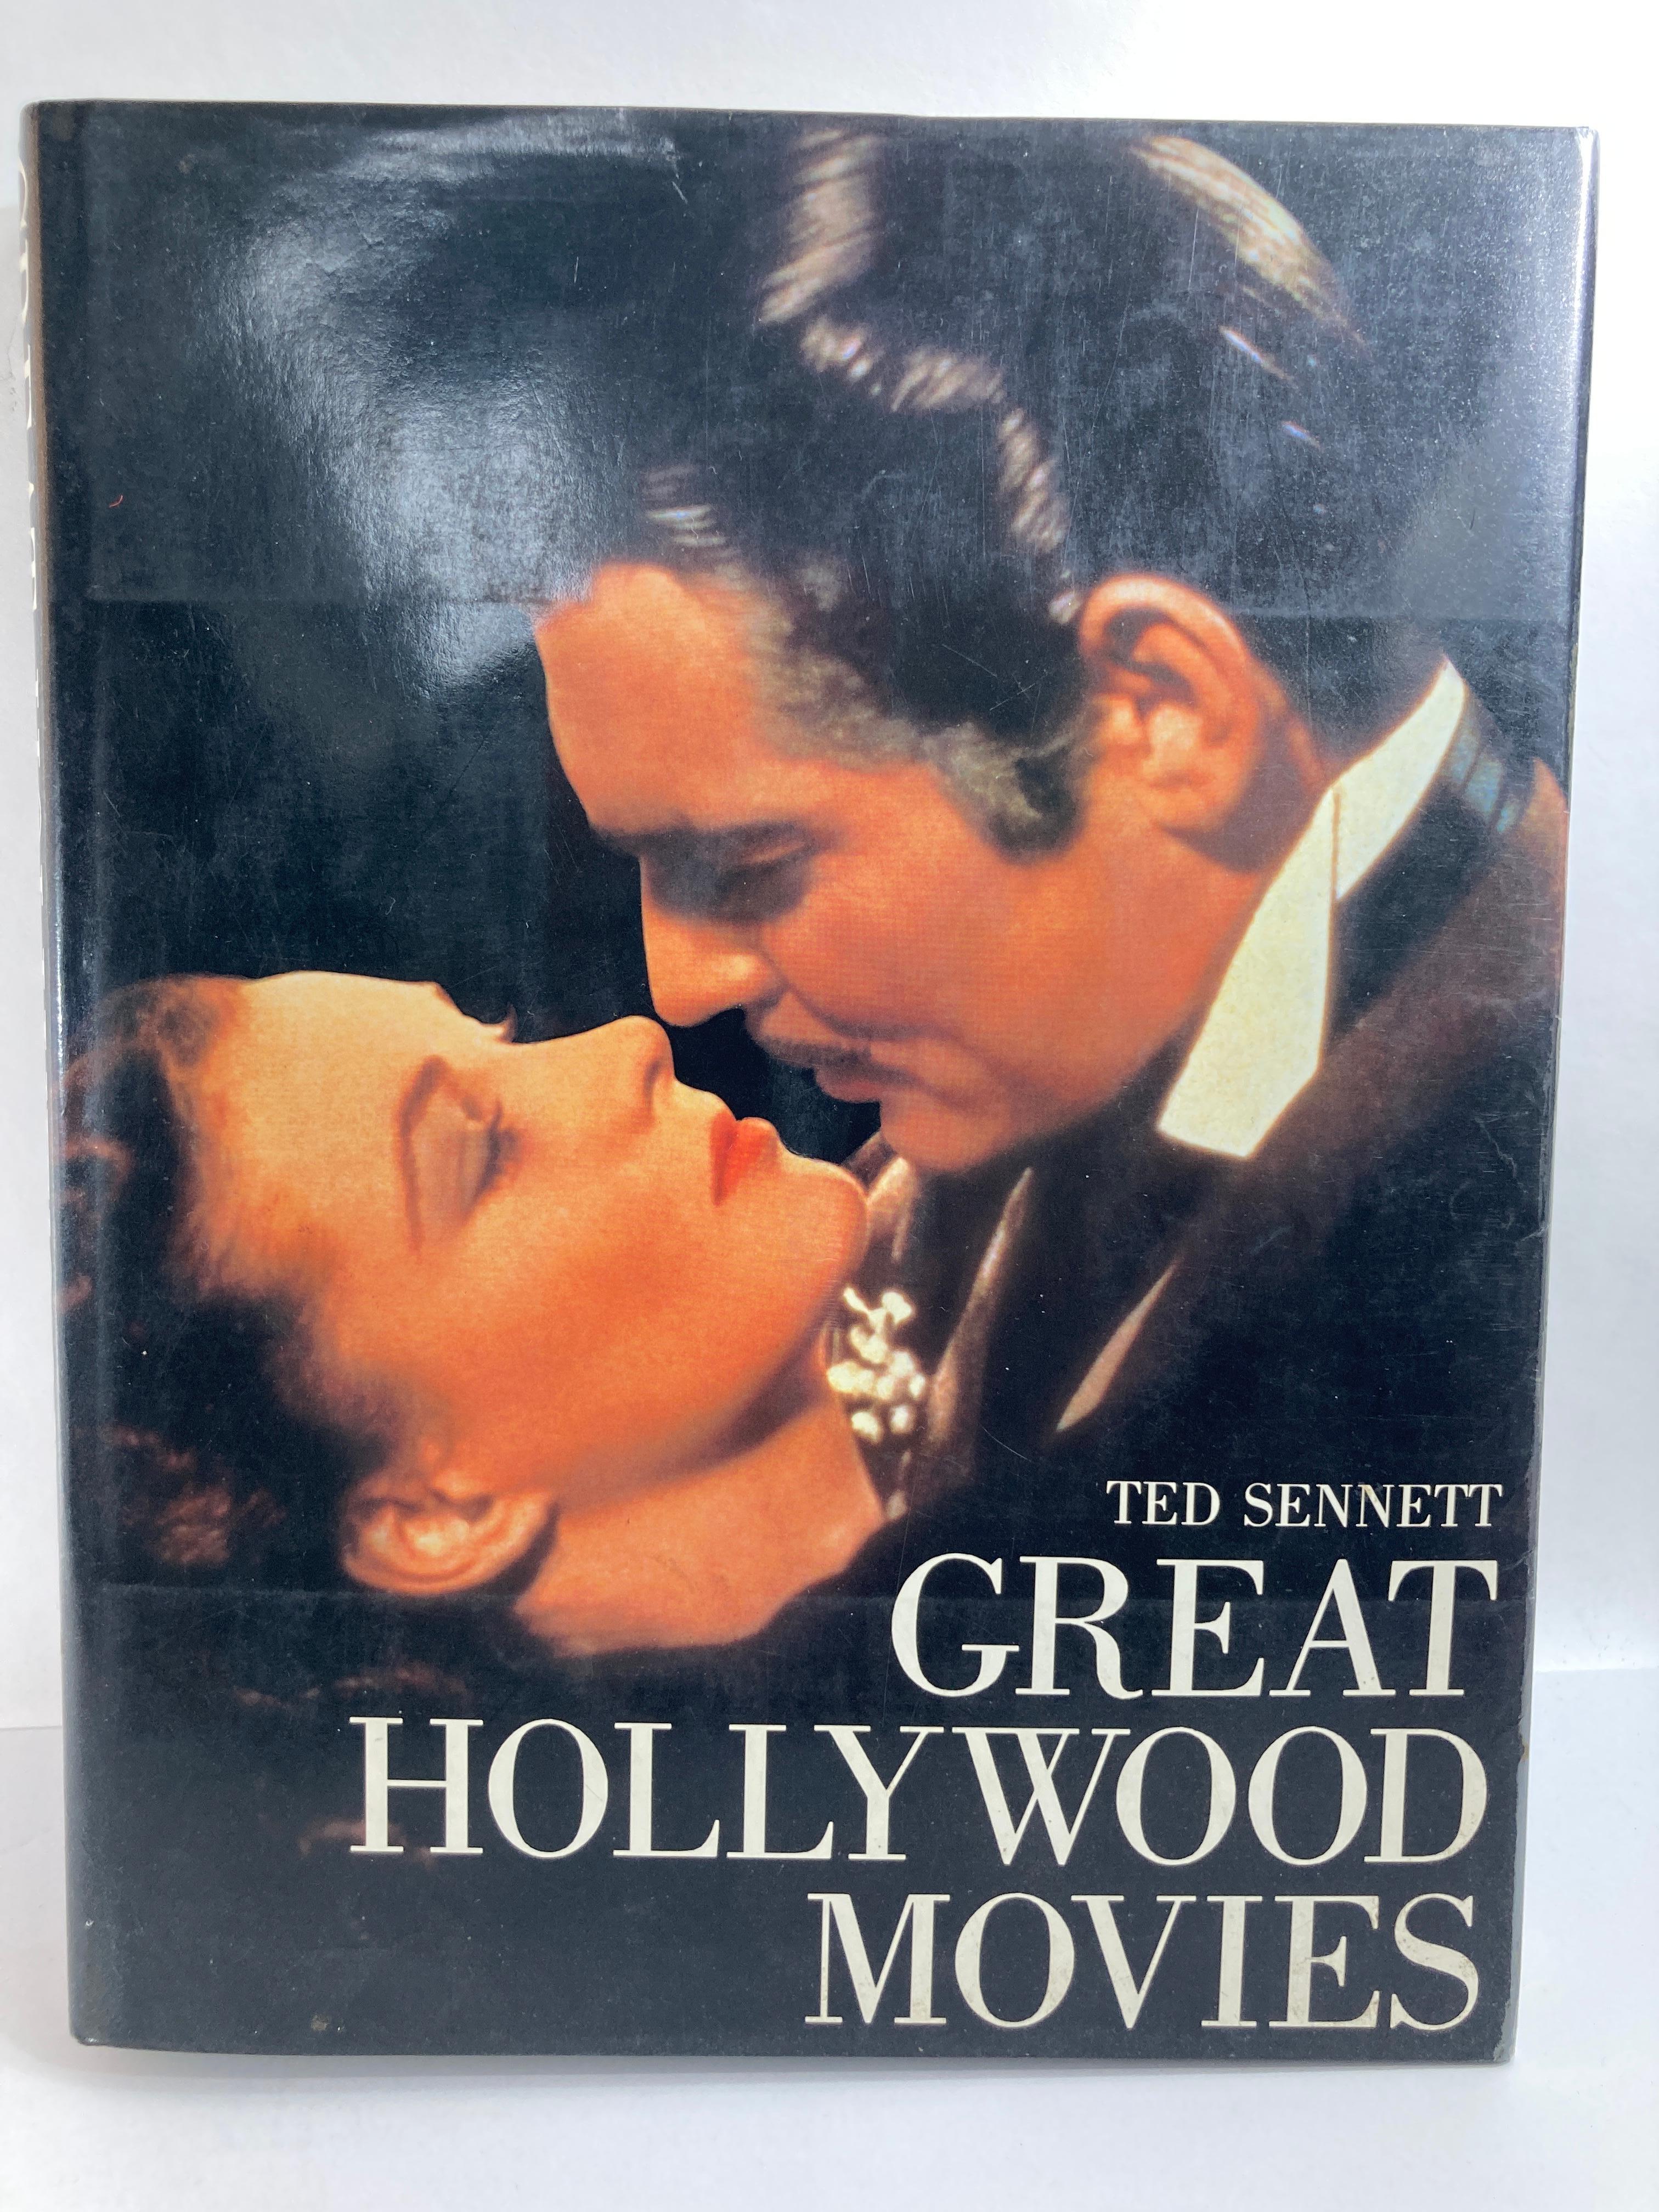 Great Hollywood Movies by Ted Sennett Hardcover Book 1st Ed. 1983 1